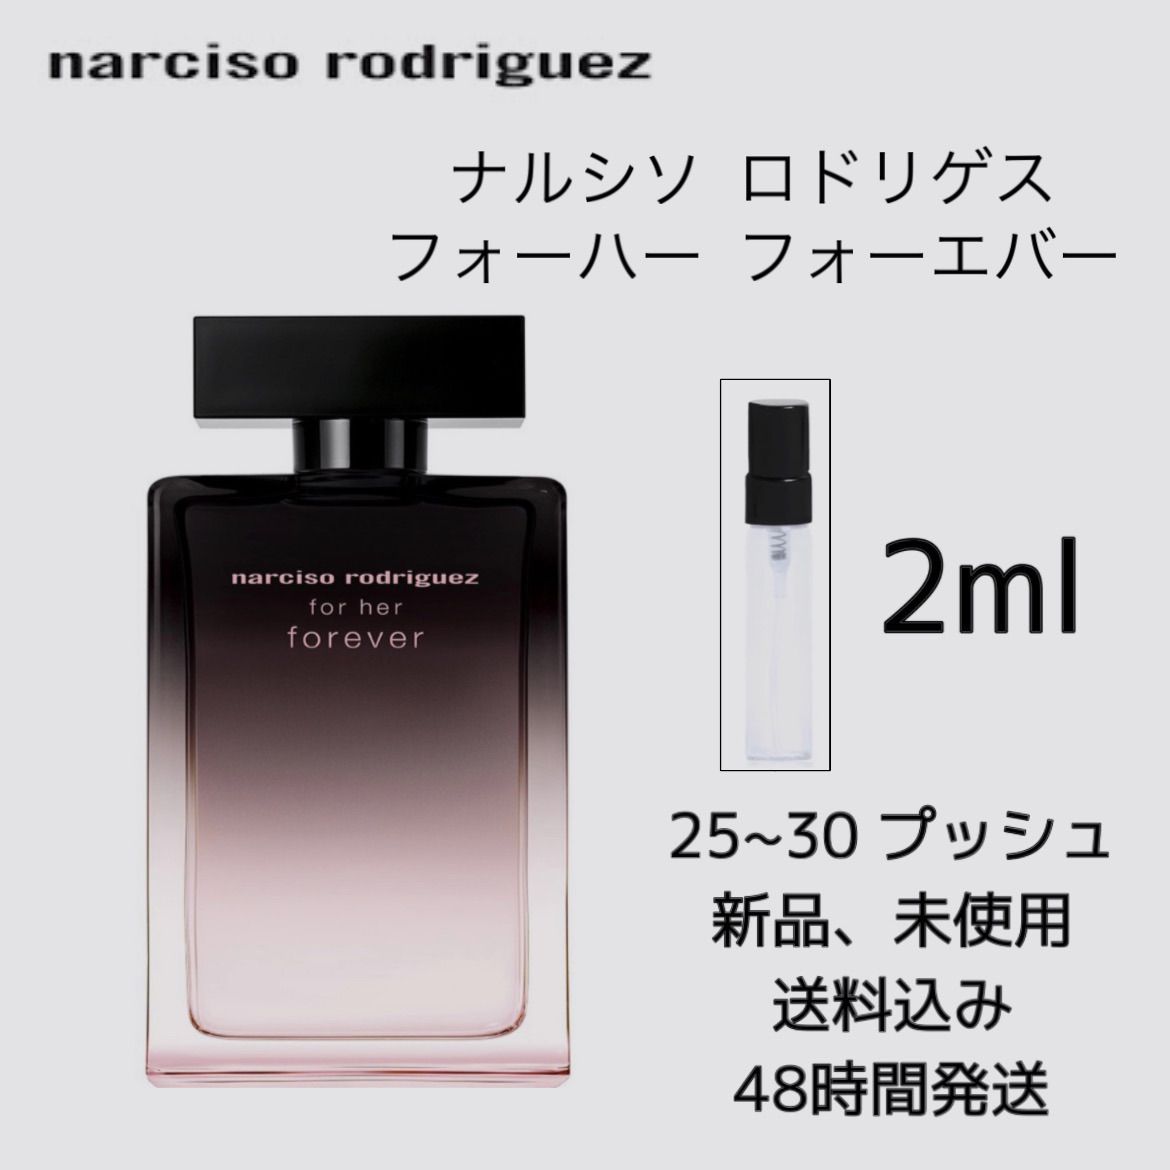 Narciso Rodriguez ナルシソ ロドリゲス フォーハー EDT・SP 30ml 香水 フレグランス NARCISO RODRIGUEZ FOR HER 新品 未使用